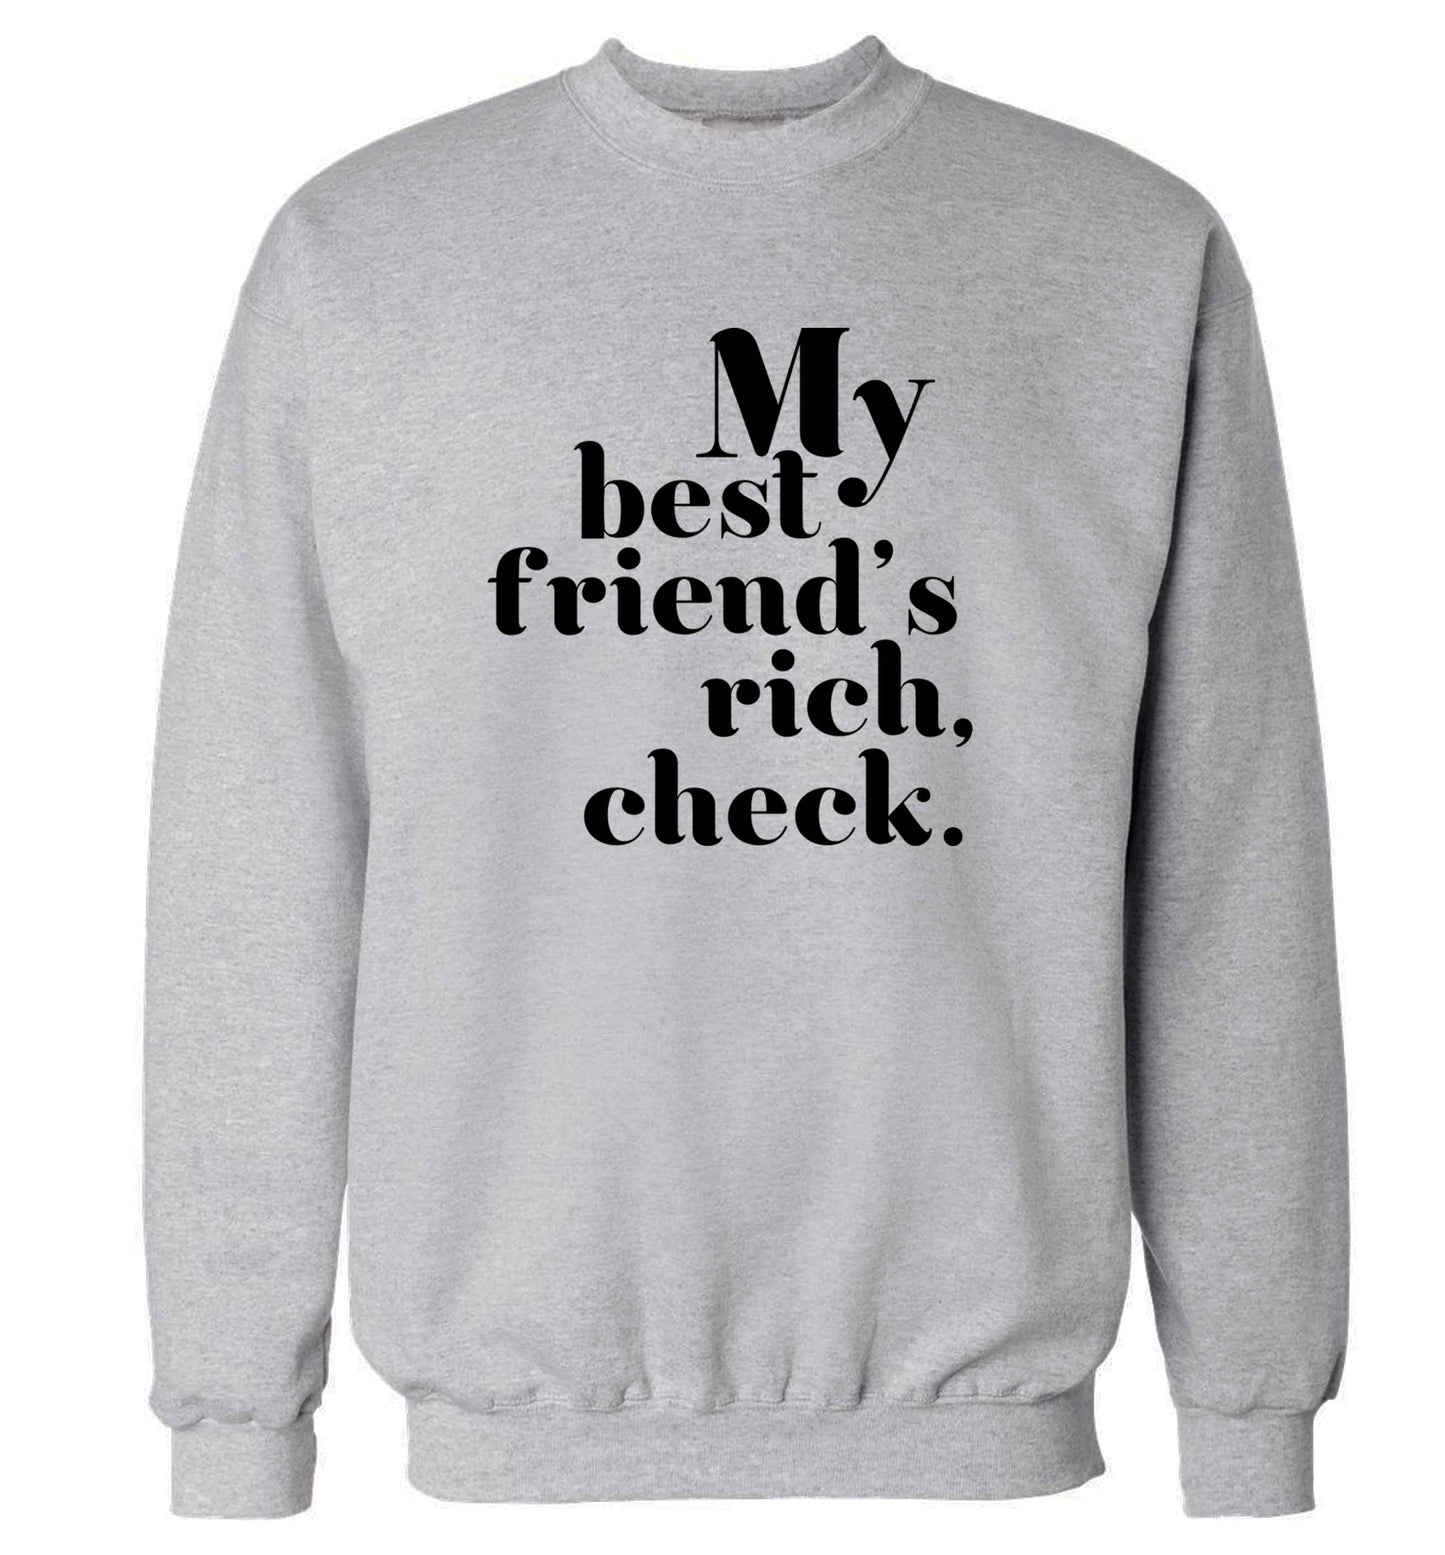 Got a rich best friend? Why not ask them to get you this, just let us  know and we'll tripple the price ;)  adult's unisex grey sweater 2XL